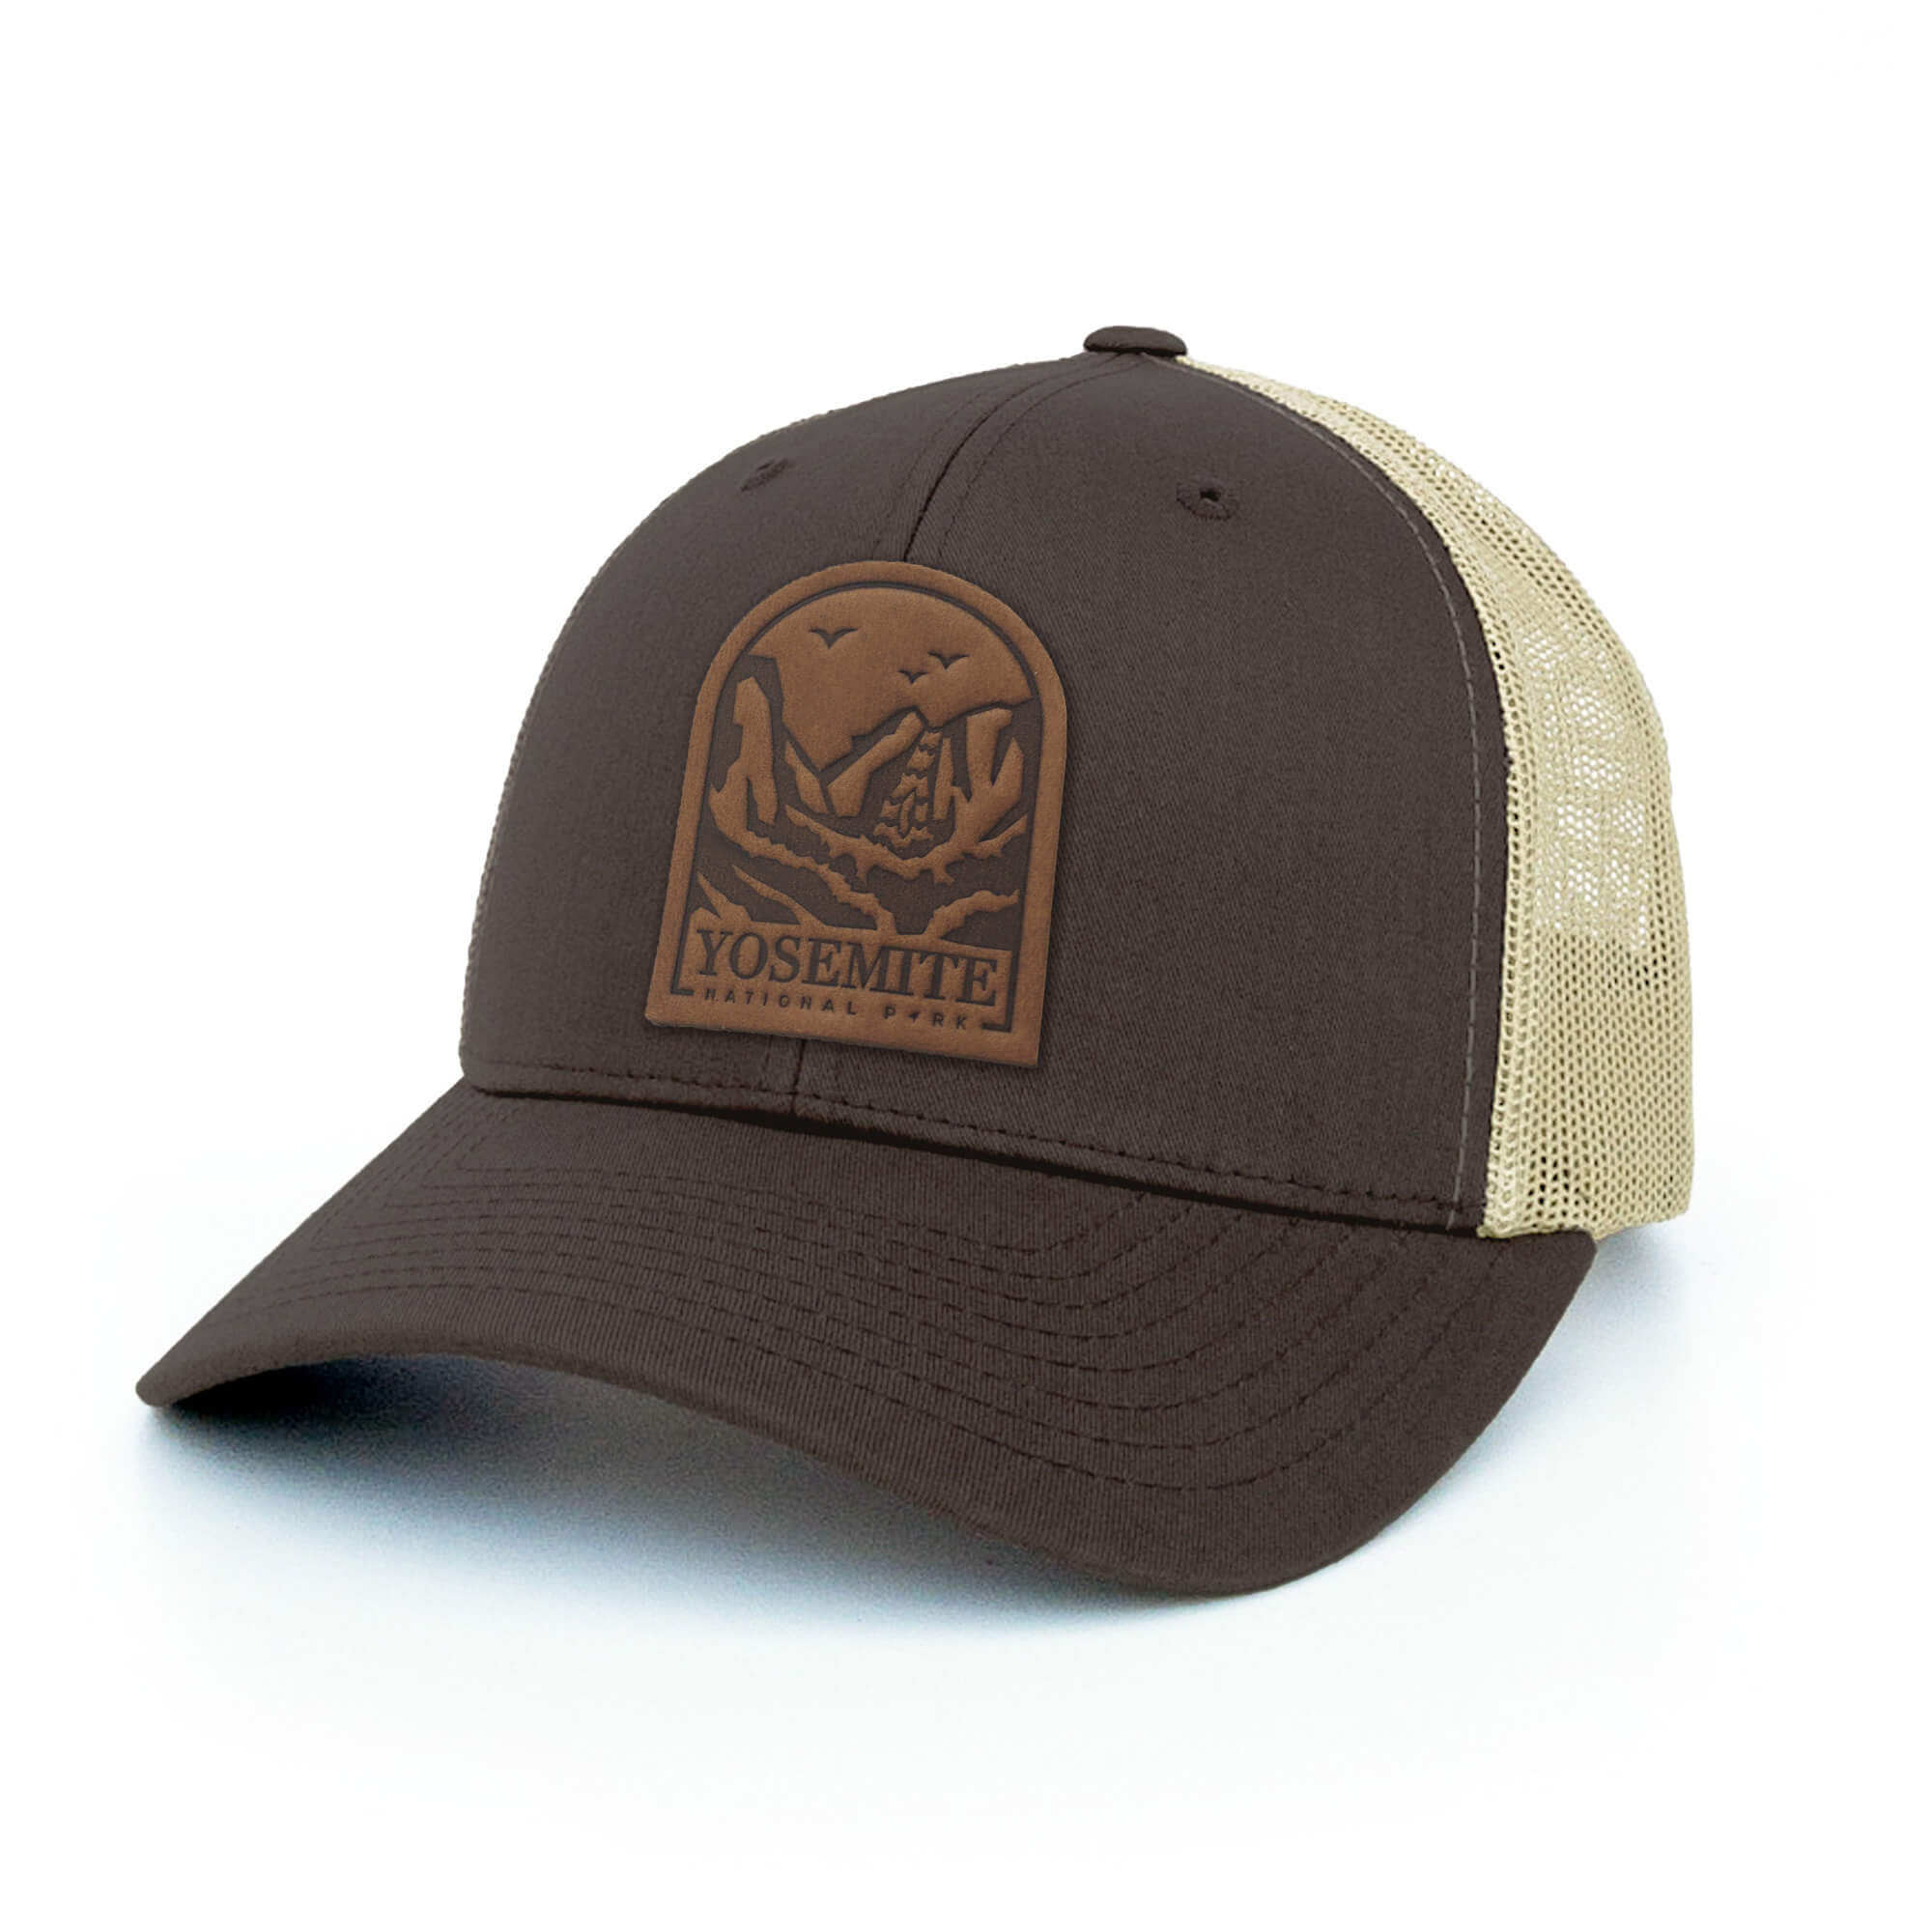 Brown and khaki trucker hat with full-grain leather patch of Yosemite National Park | BLACK-007-002, CHARC-007-002, NAVY-007-002, HGREY-007-002, MOSS-007-002, BROWN-007-002